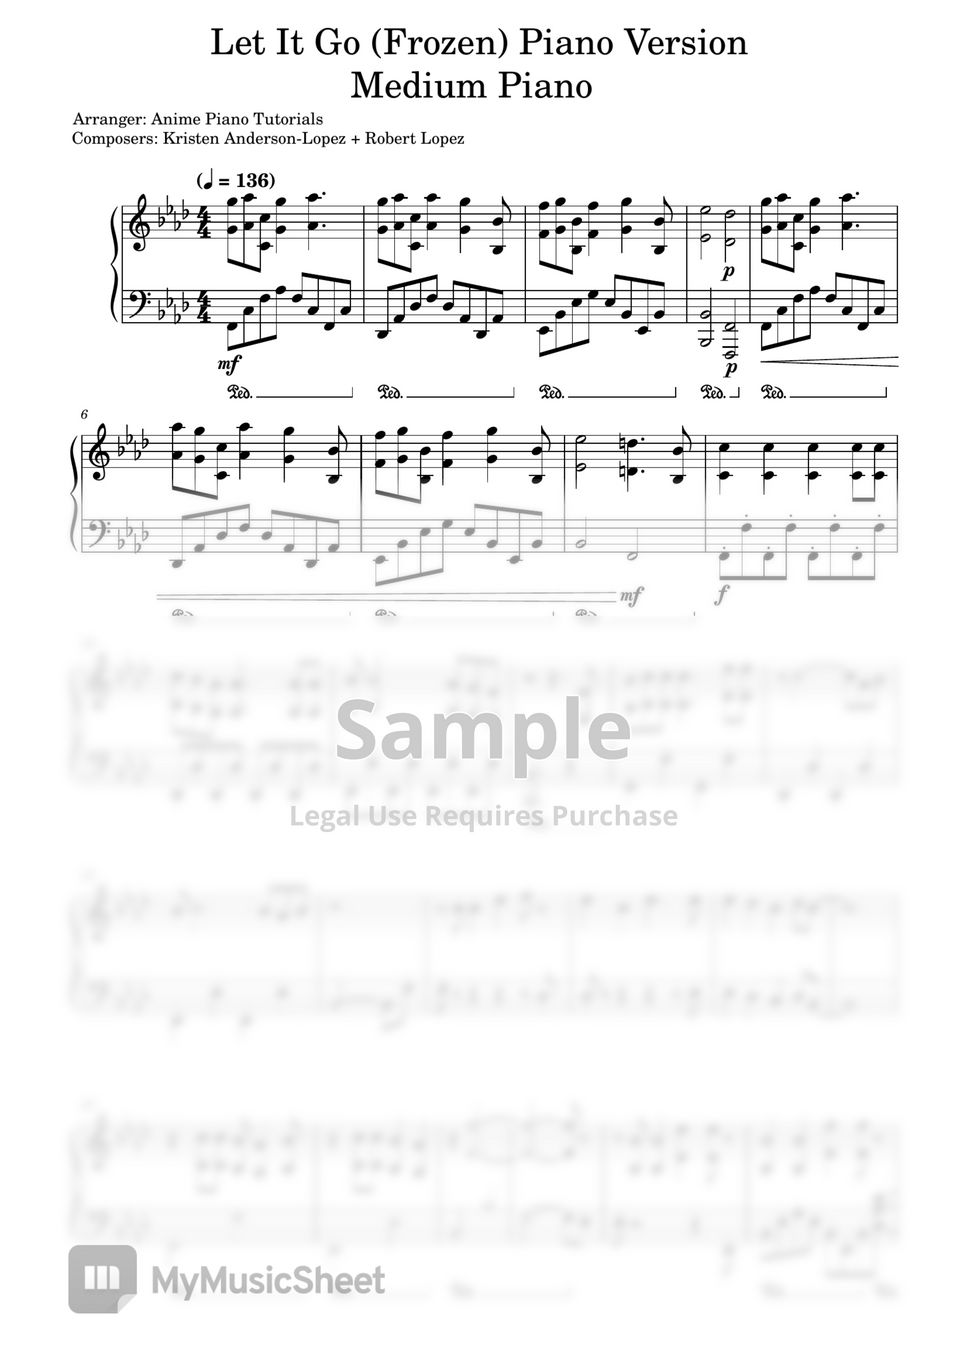 frozen-let-it-go-sheets-by-anime-piano-tutorials